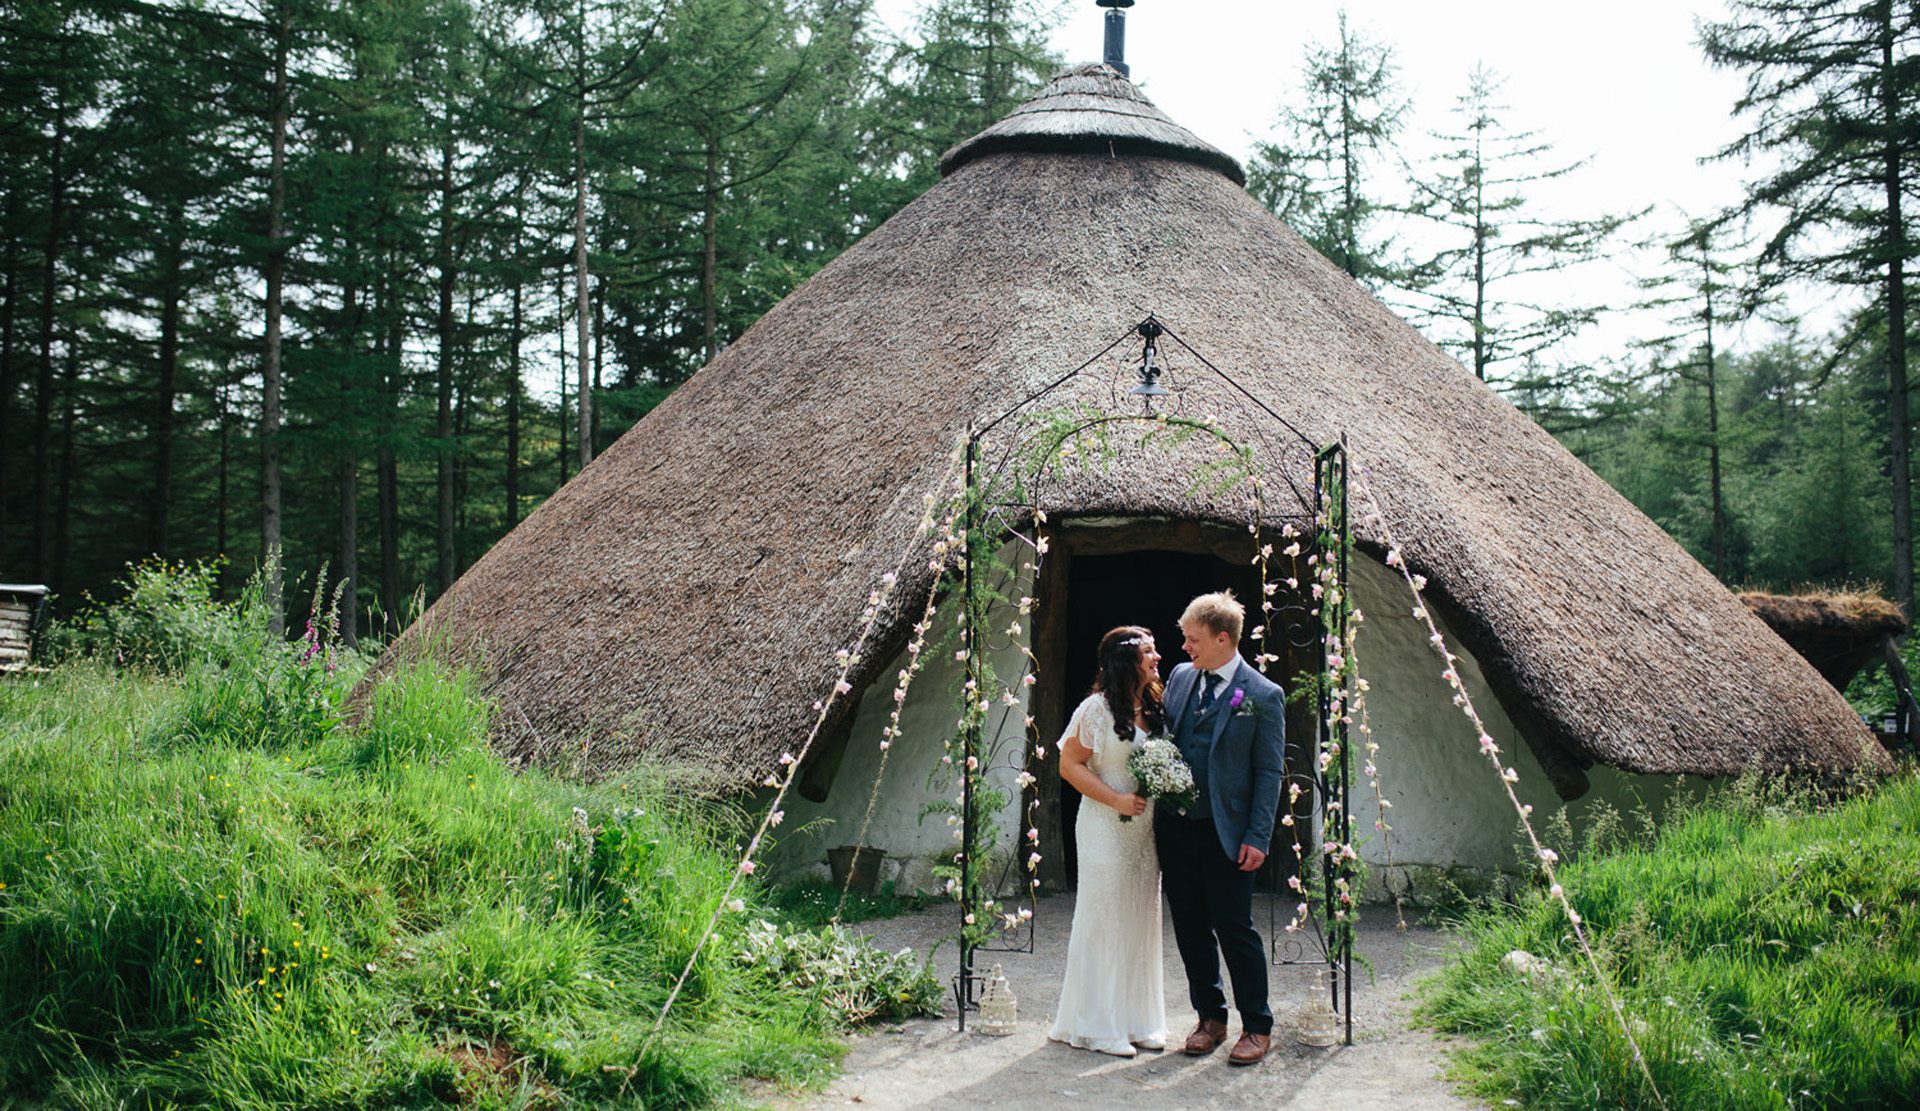 A young couple on their marriage day stood in front of a thatched glamping house